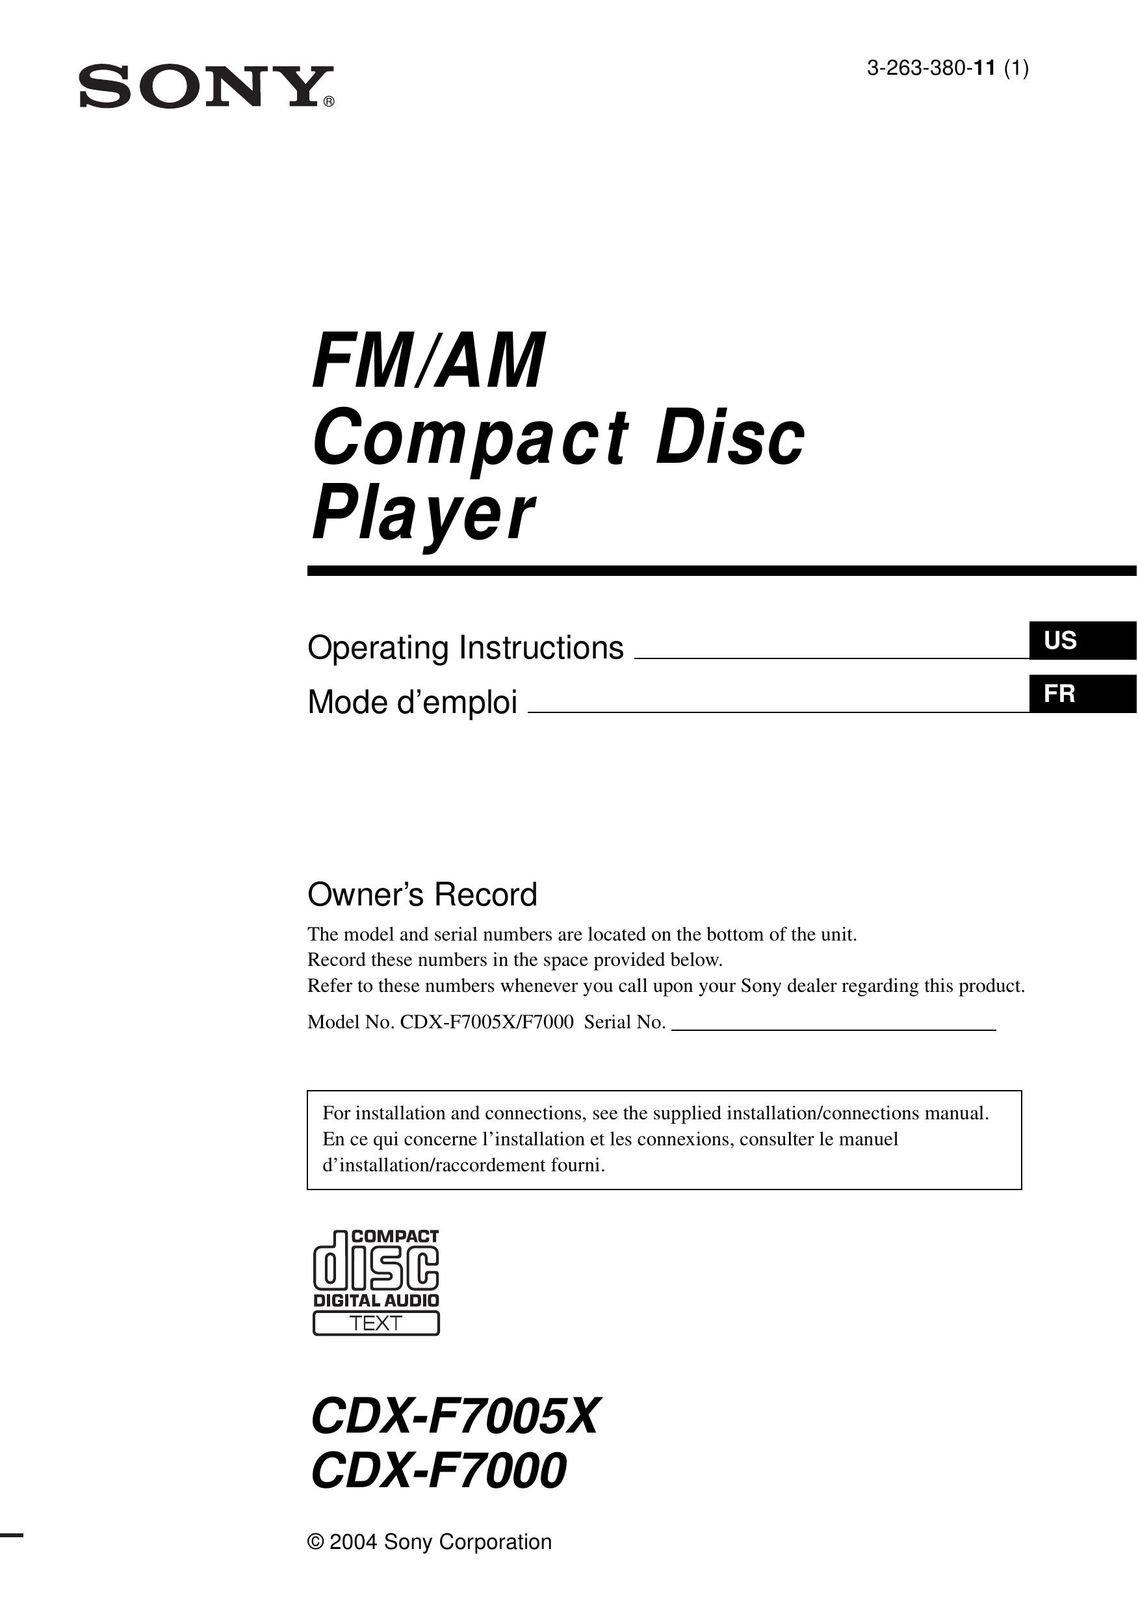 Sony CDX-F7000 Portable CD Player User Manual